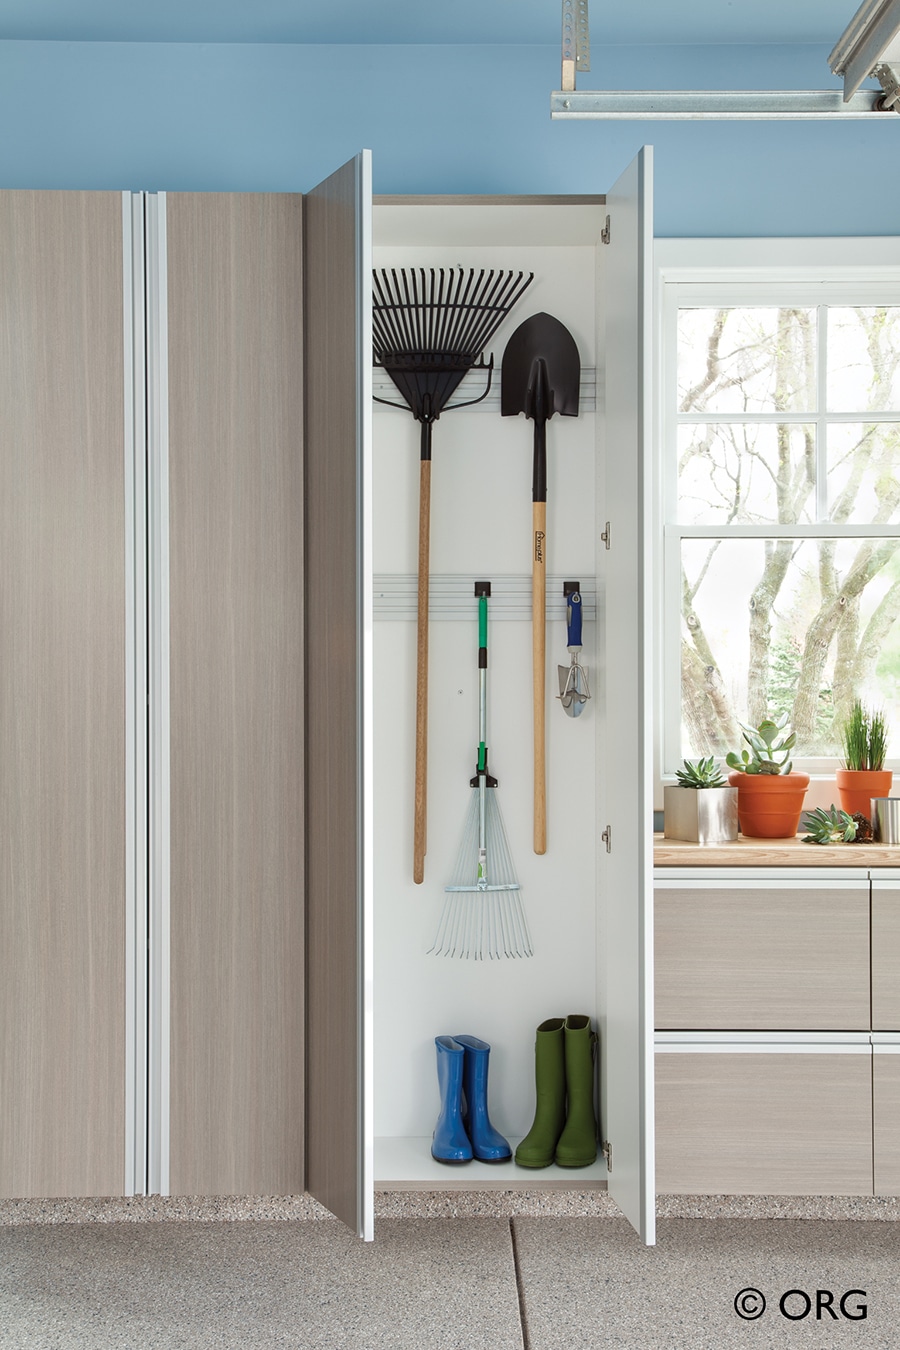 Factor 10 slatwall and hooks in a cabinet with shovels and rakes Columbus ohio | innovate Home Org #slatwall #Garagehooks #Storagehooks #cabinetstorage